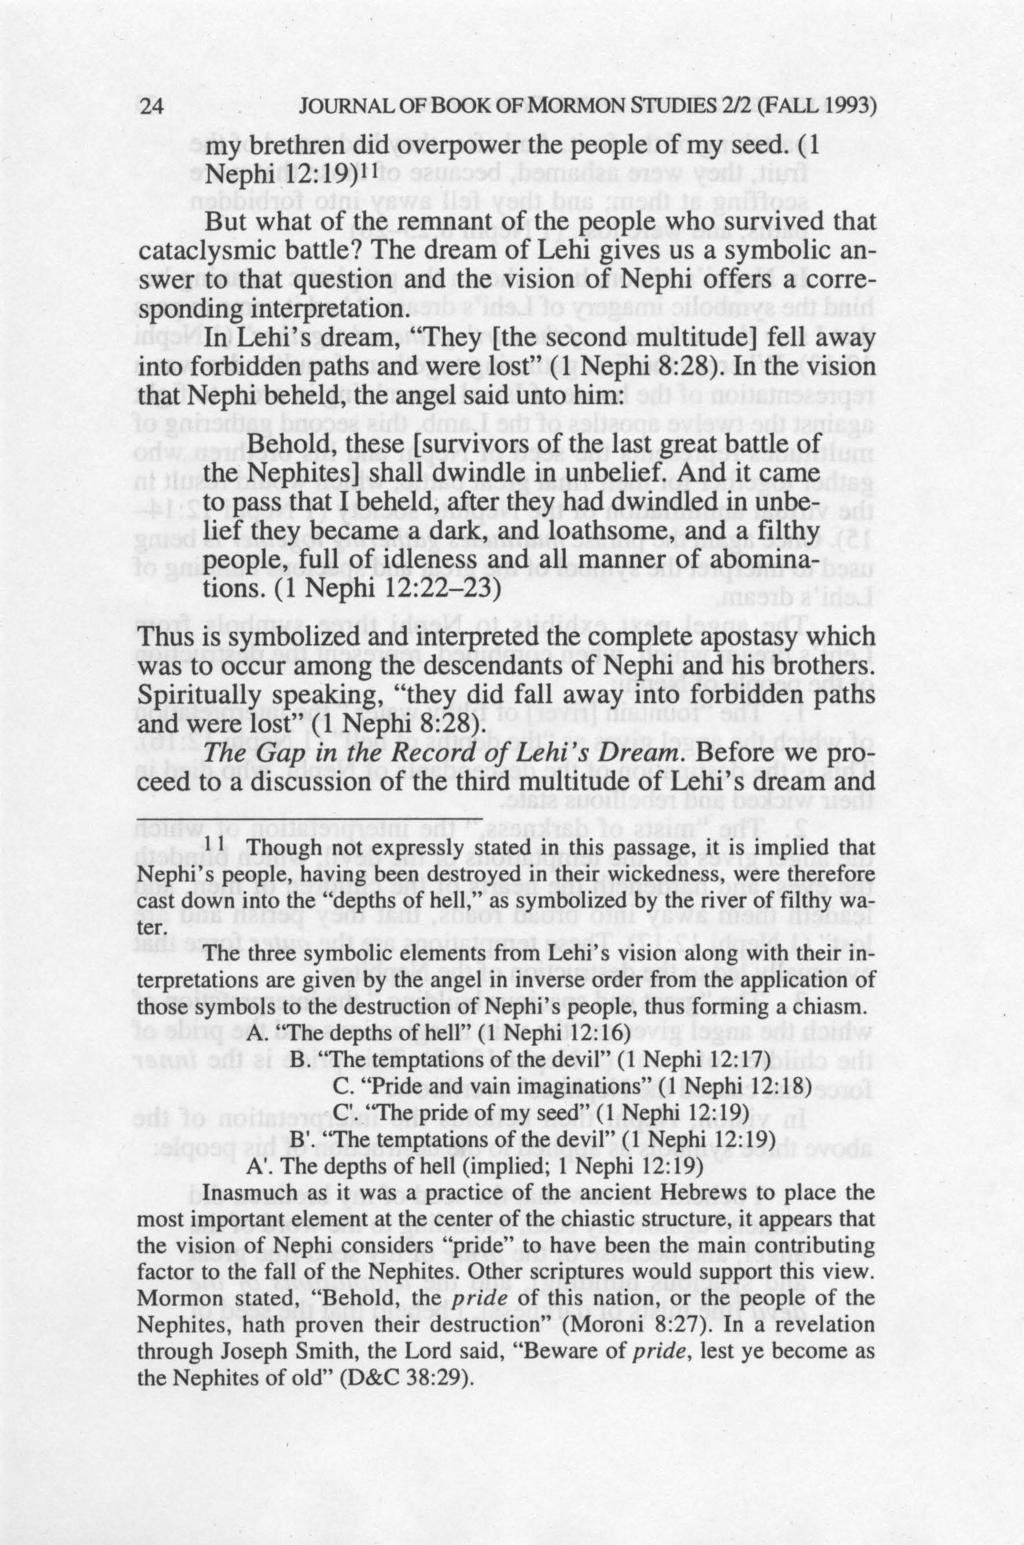 24 JOURNAL OF BOOK OF MORMON STUDIES 212 (FALL 1993) my brethren did overpower the people of my seed. (1 Nephi 12:19)11 But what of the remnant of the people who survived that cataclysmic battle?